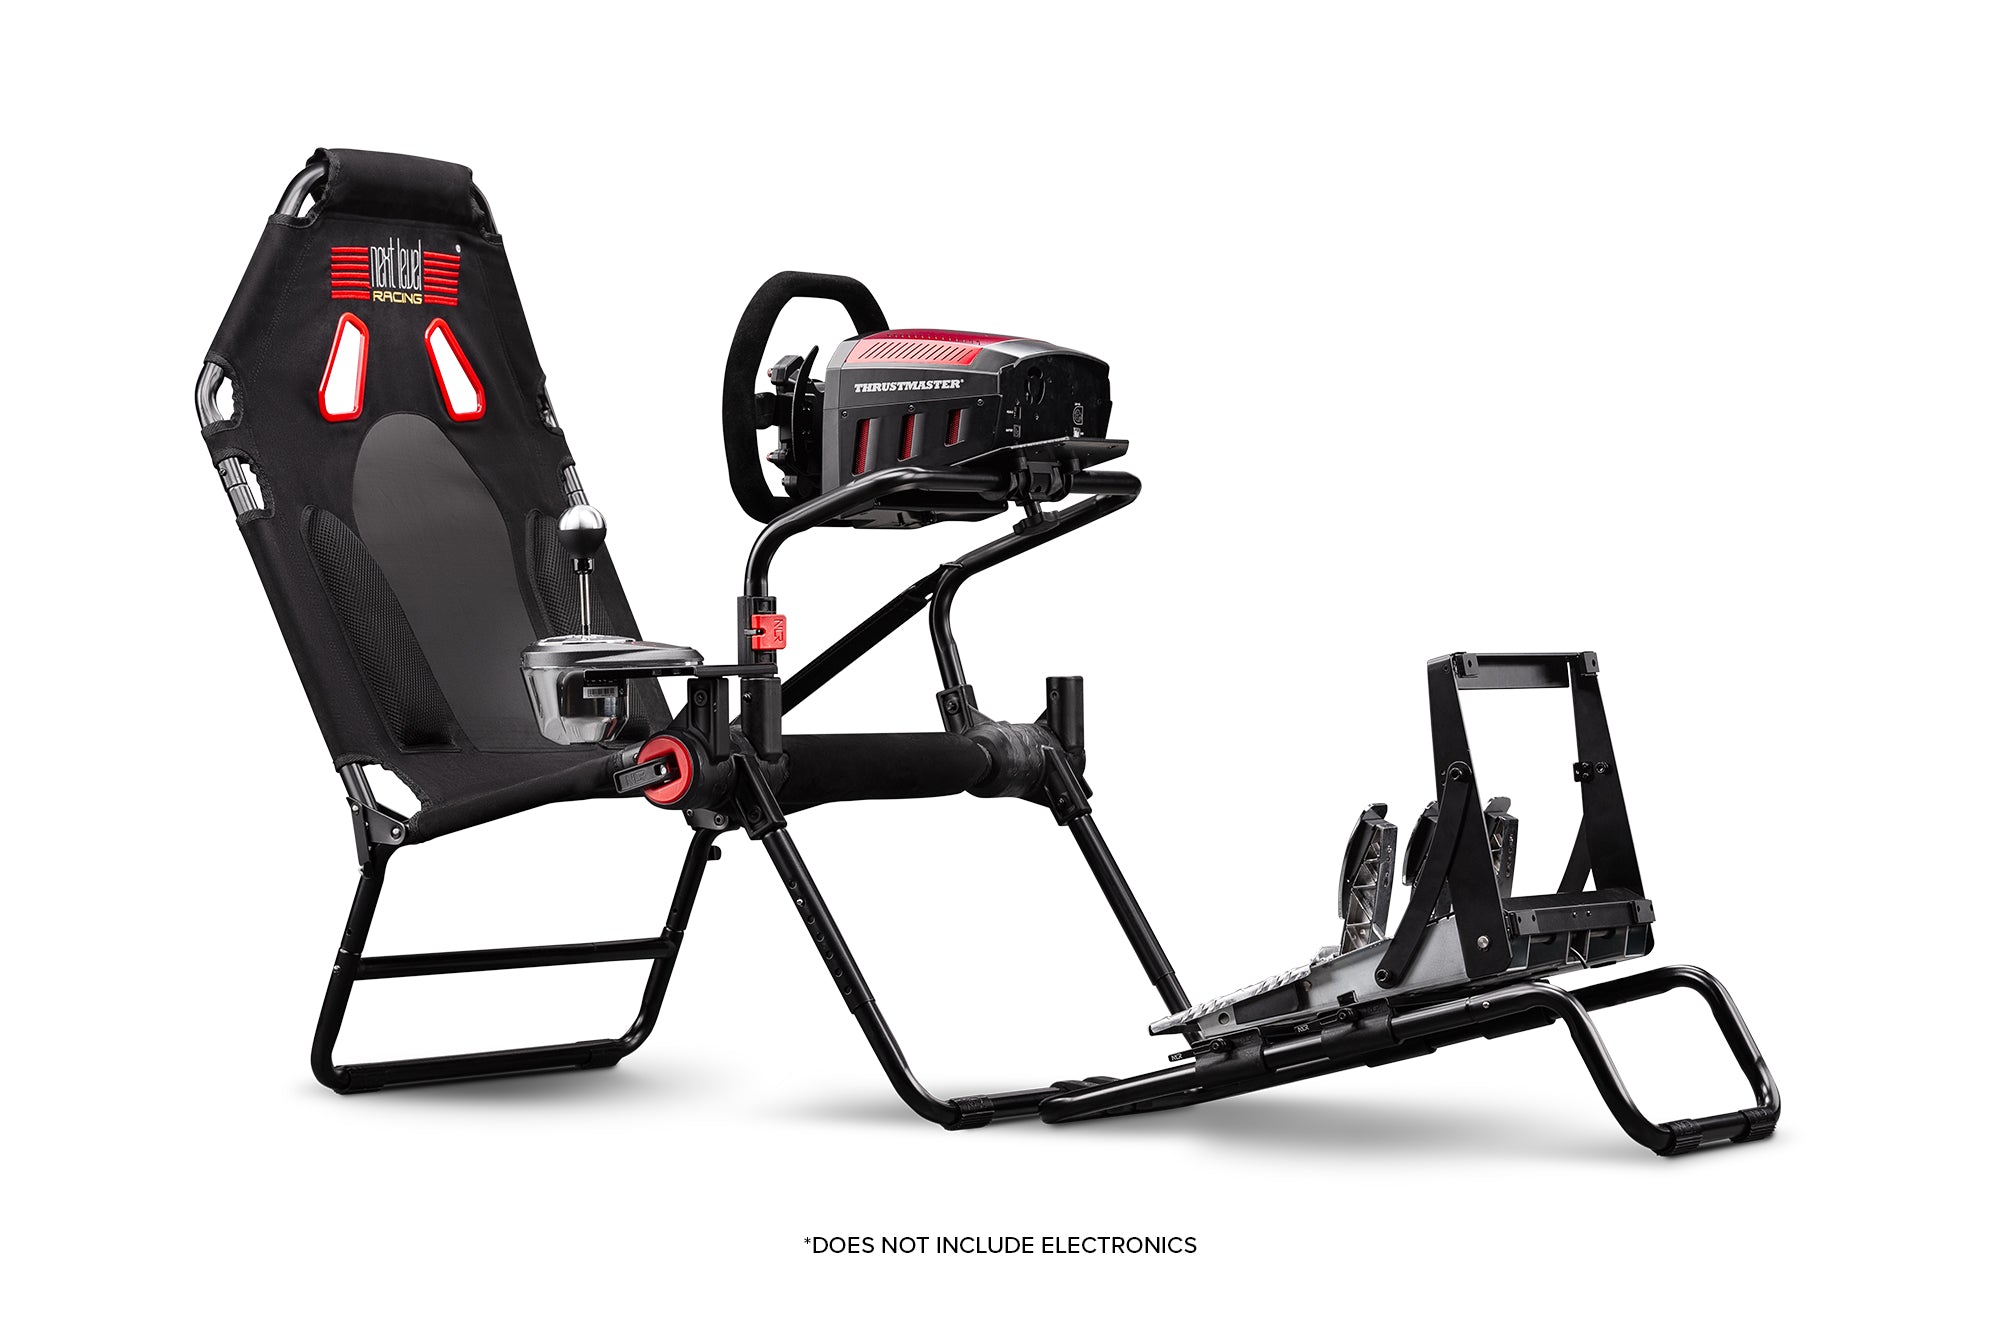 Next Level Racing's GTLite Pro is an upgraded foldable sim racing cockpit